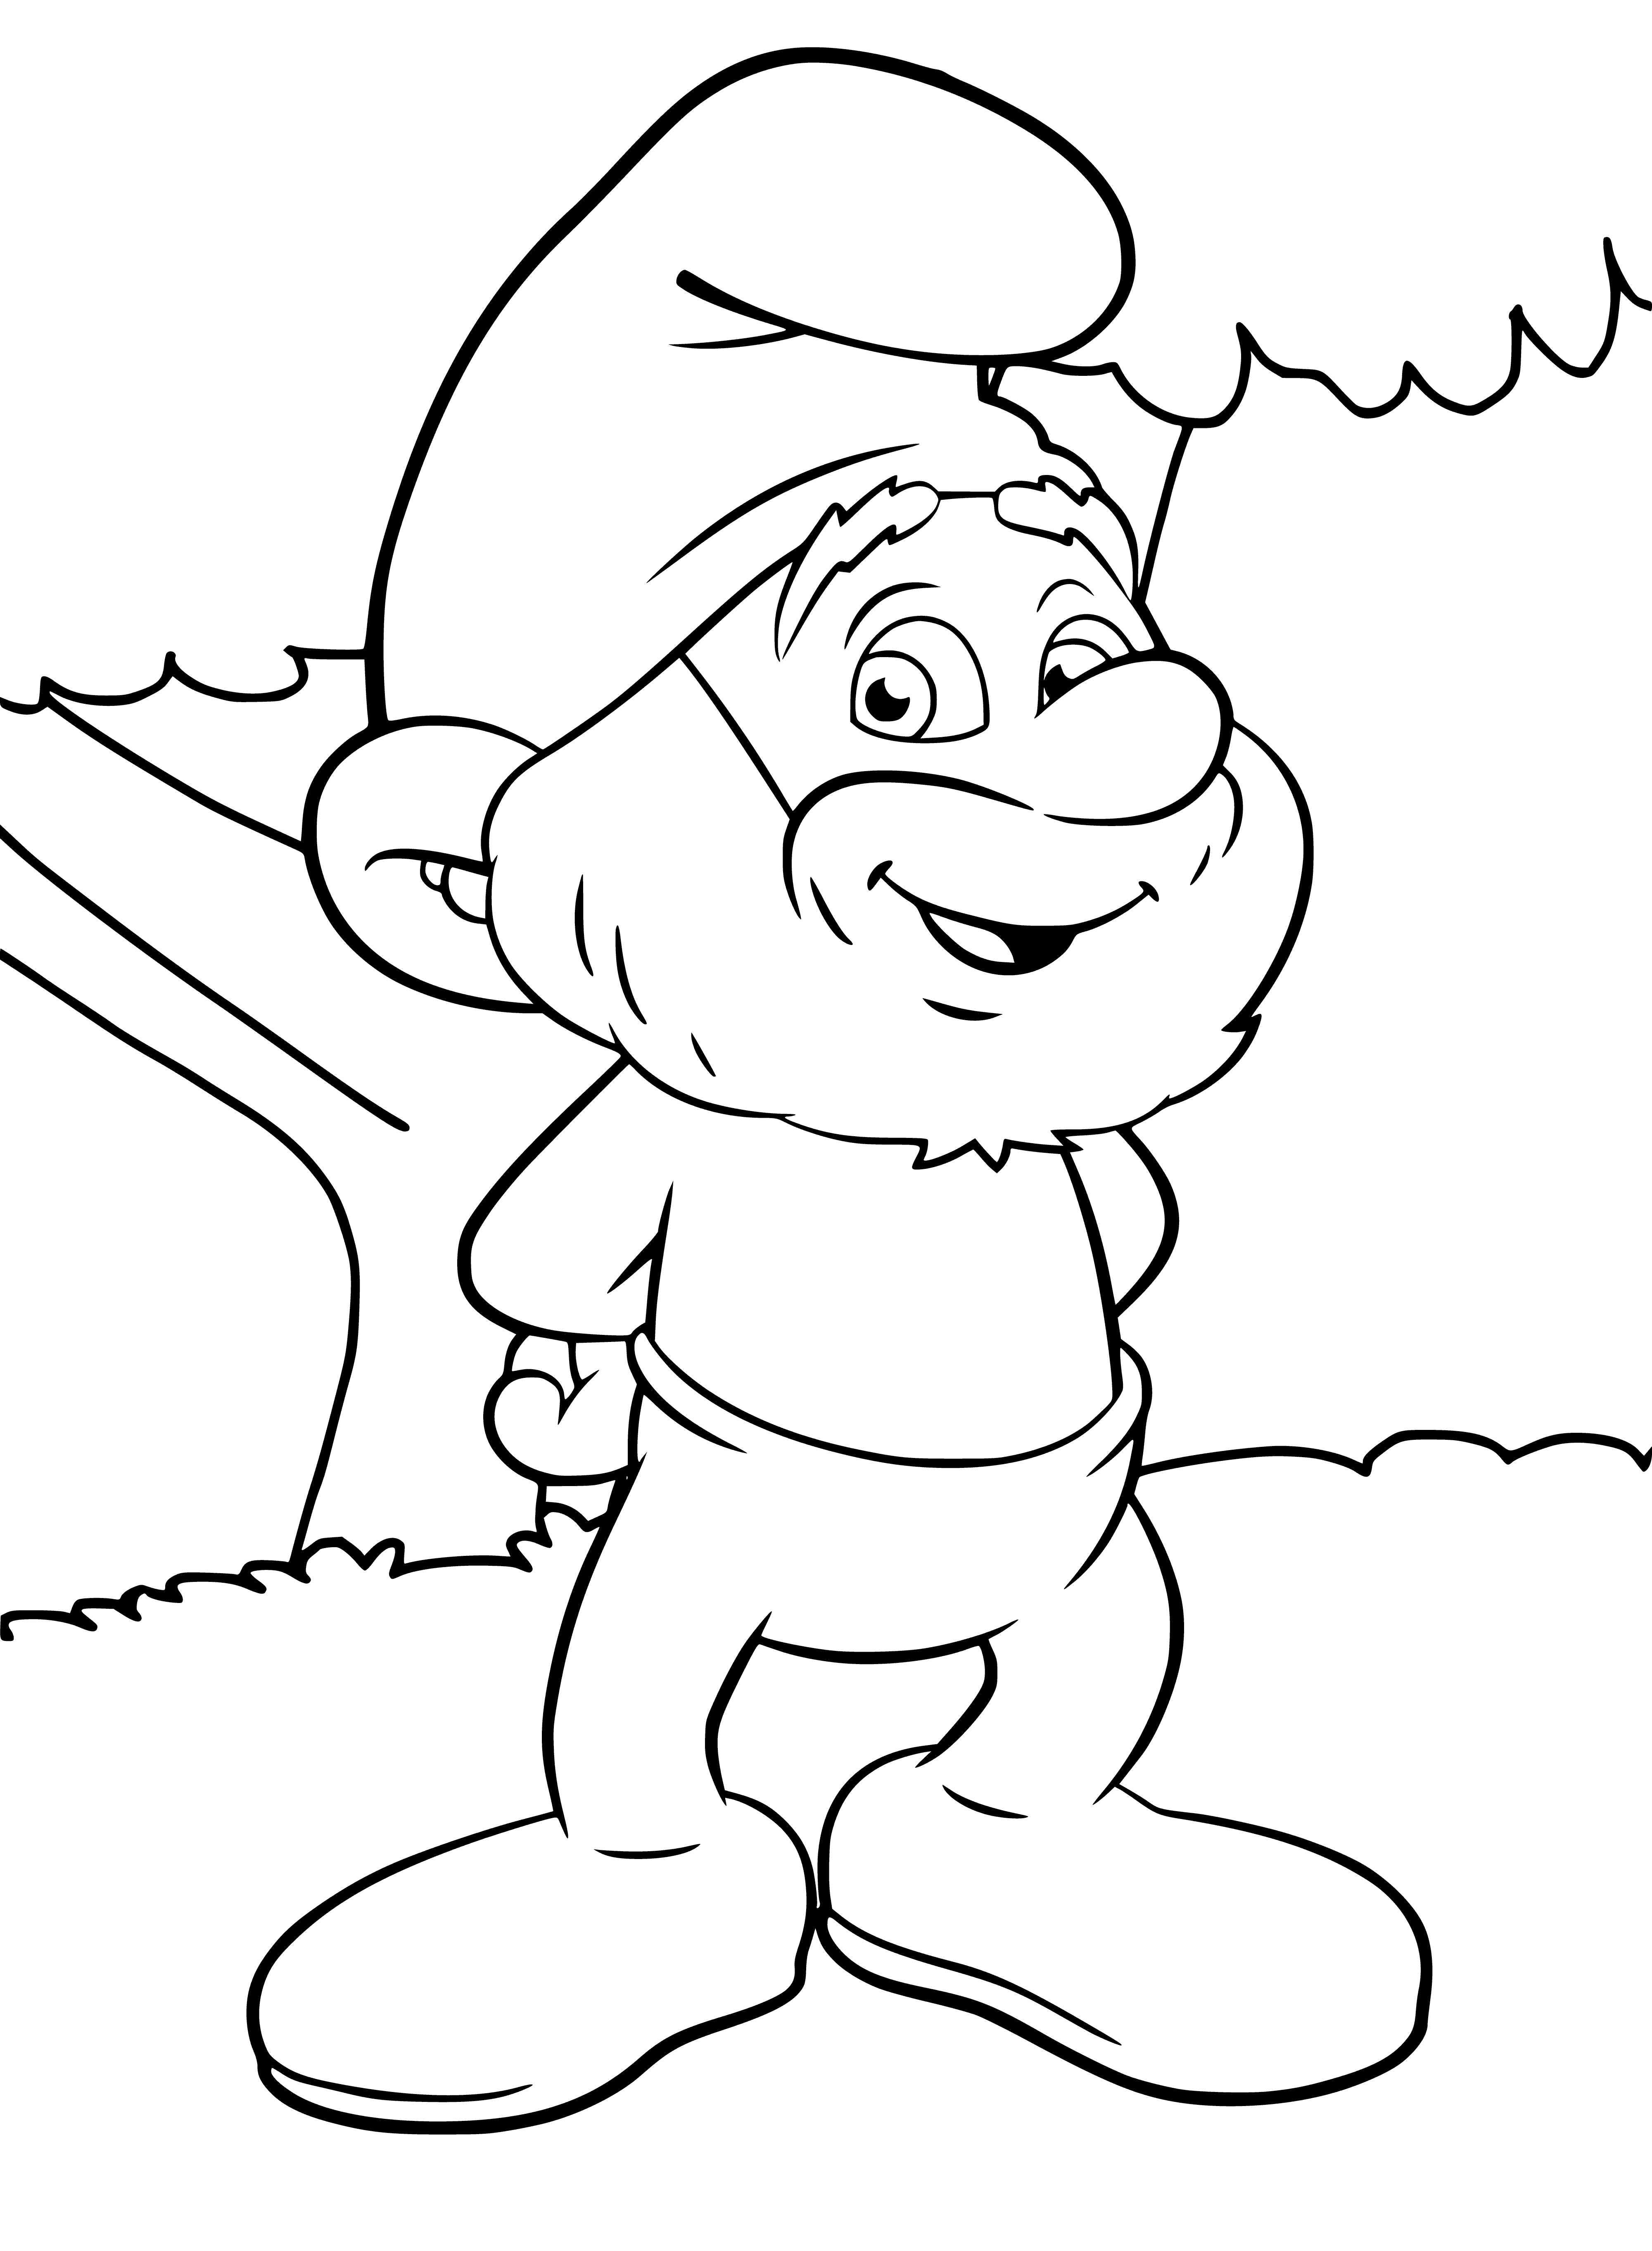 coloring page: Small blue creature with white pants and red hat, long white beard and staff, standing in front of mushroom house.